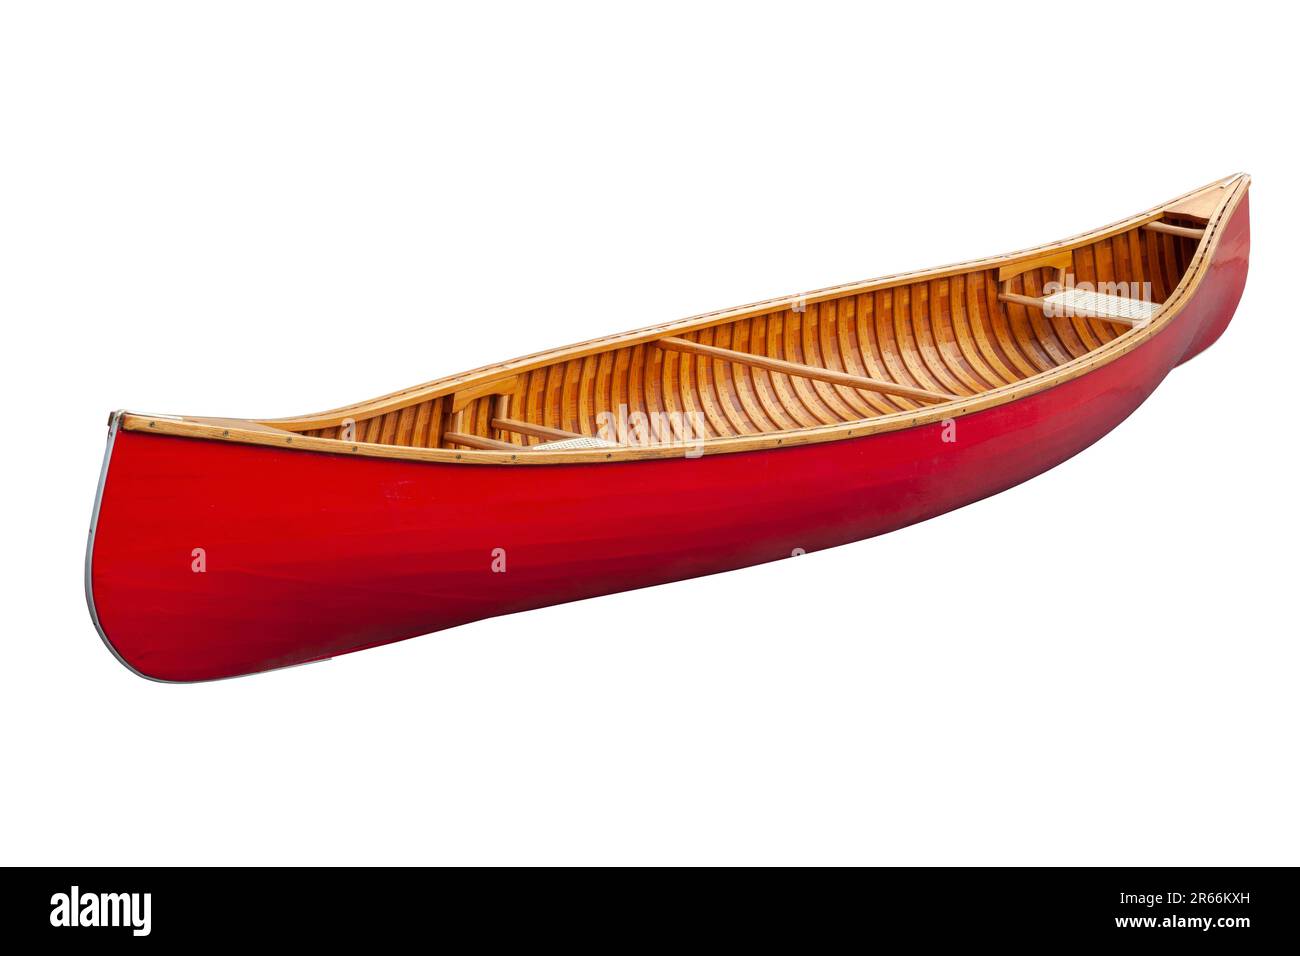 Red wooden canoe with cane seats isolated on a white background Stock Photo